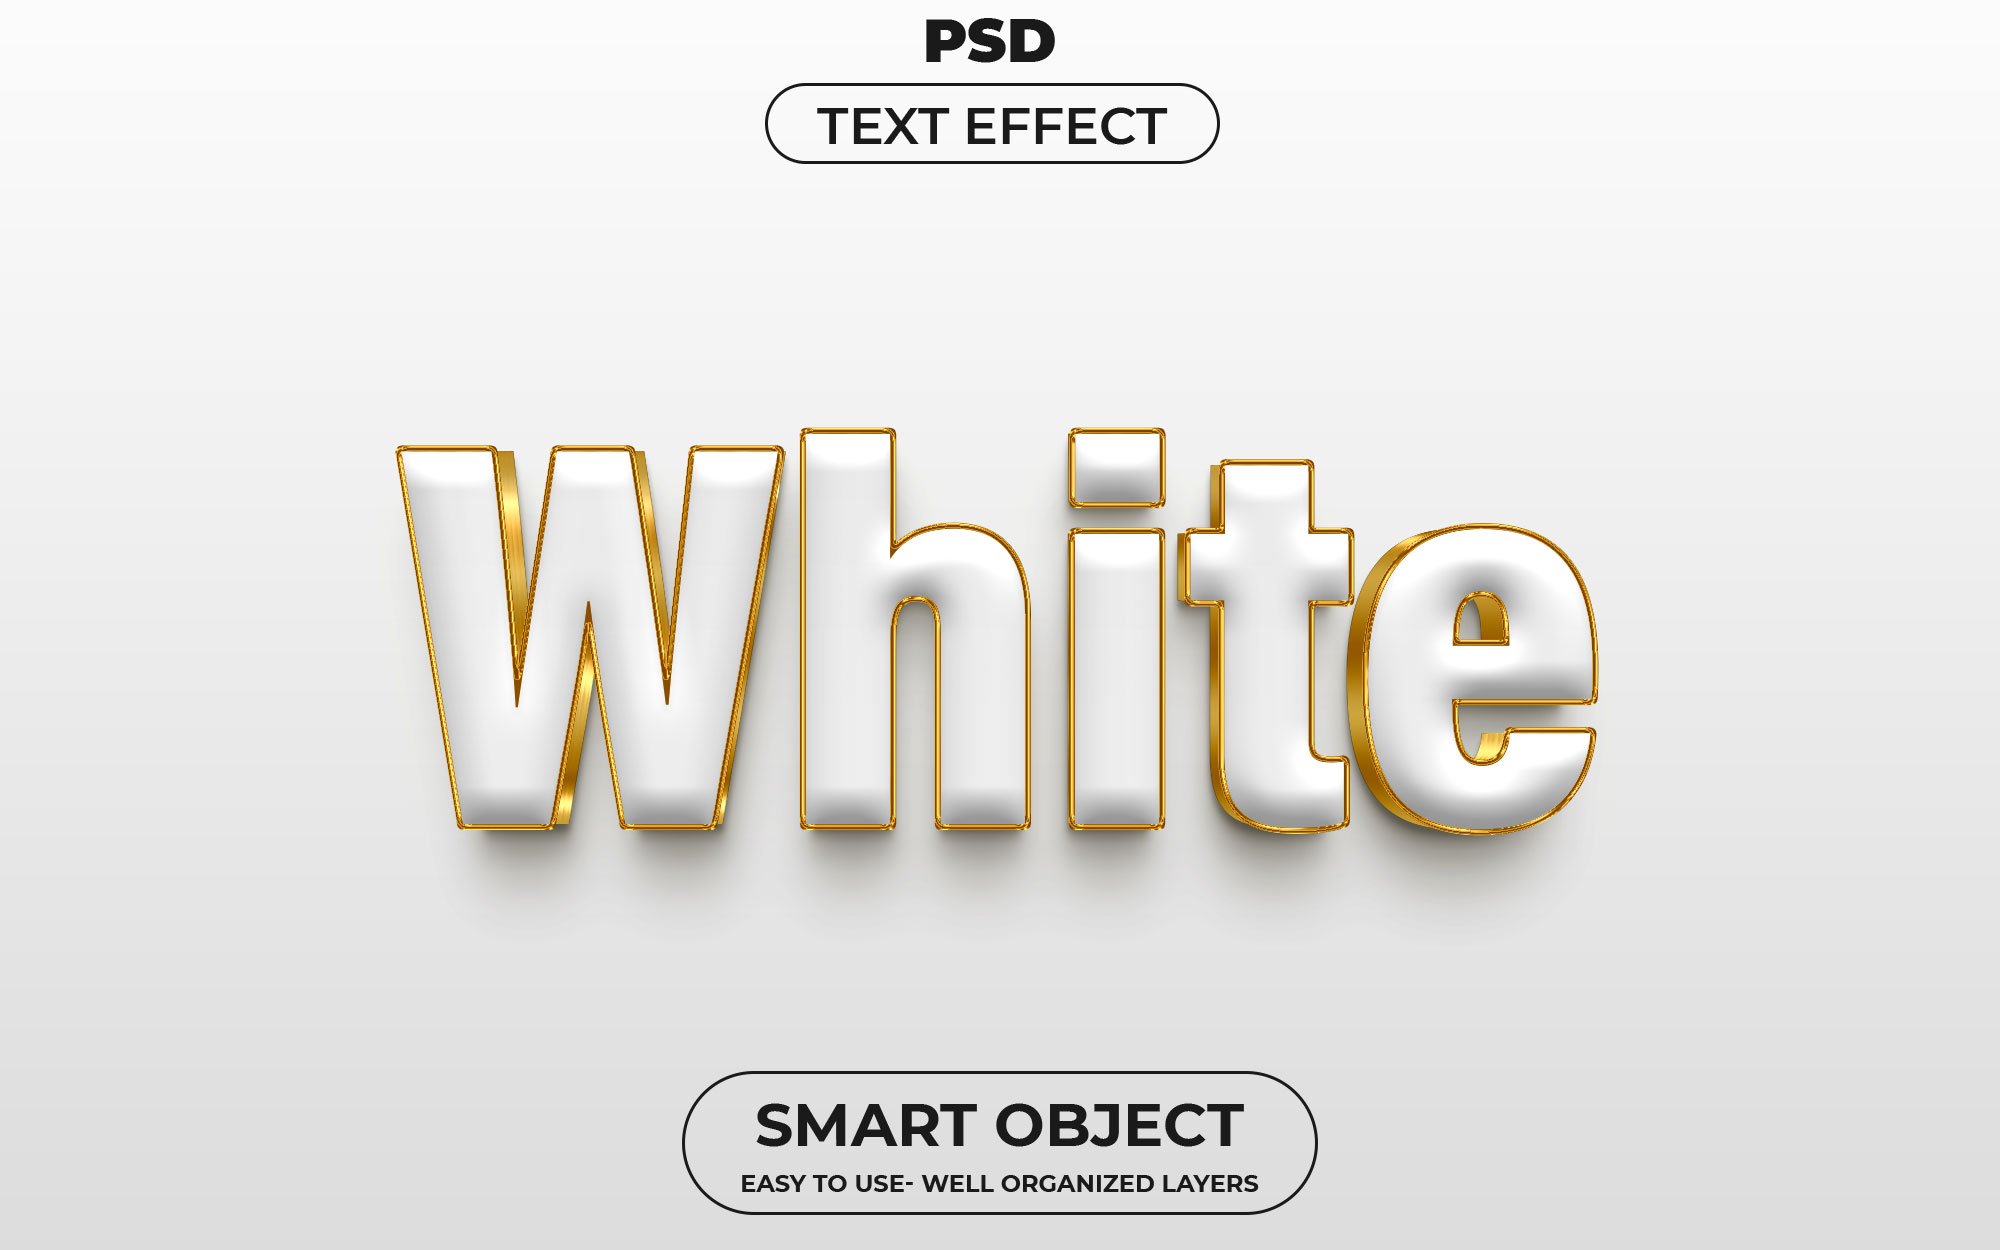 White 3D Editable psd Text Effectcover image.